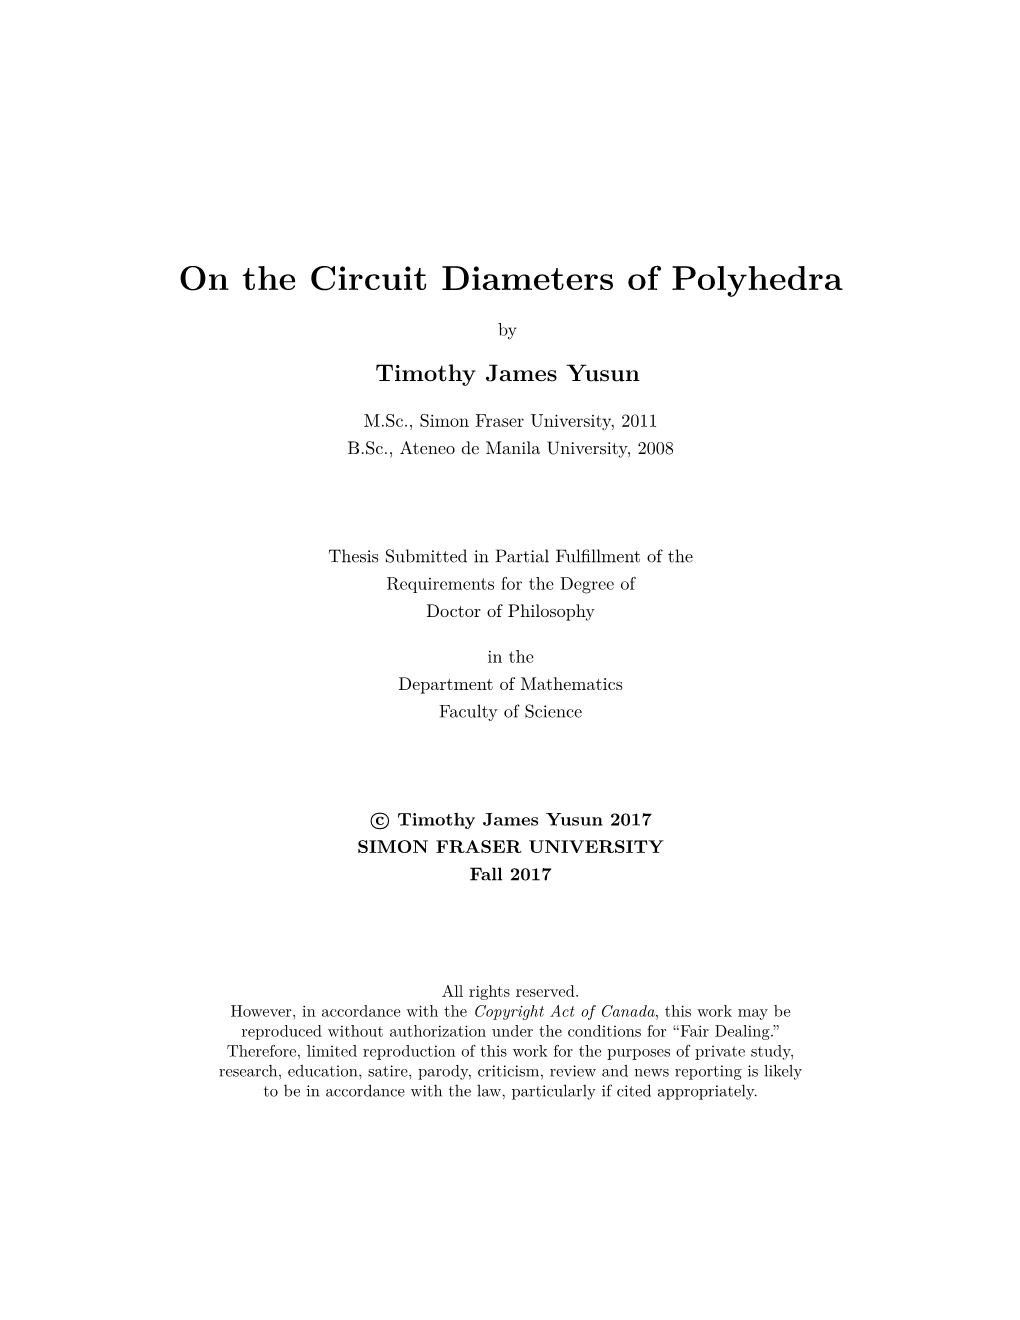 On the Circuit Diameters of Polyhedra